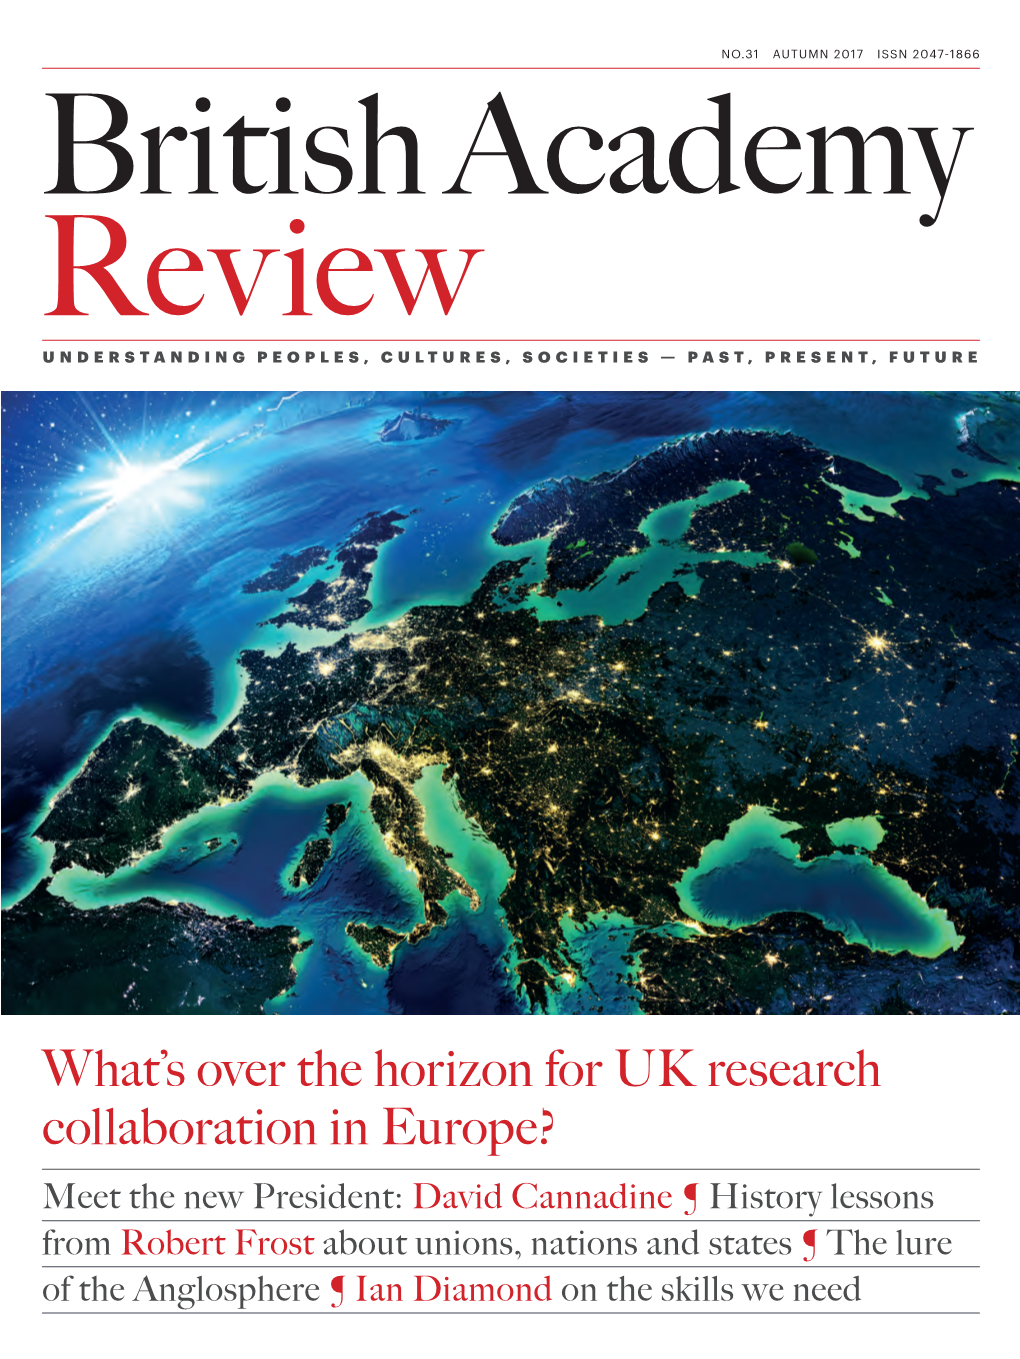 What's Over the Horizon for UK Research Collaboration in Europe?